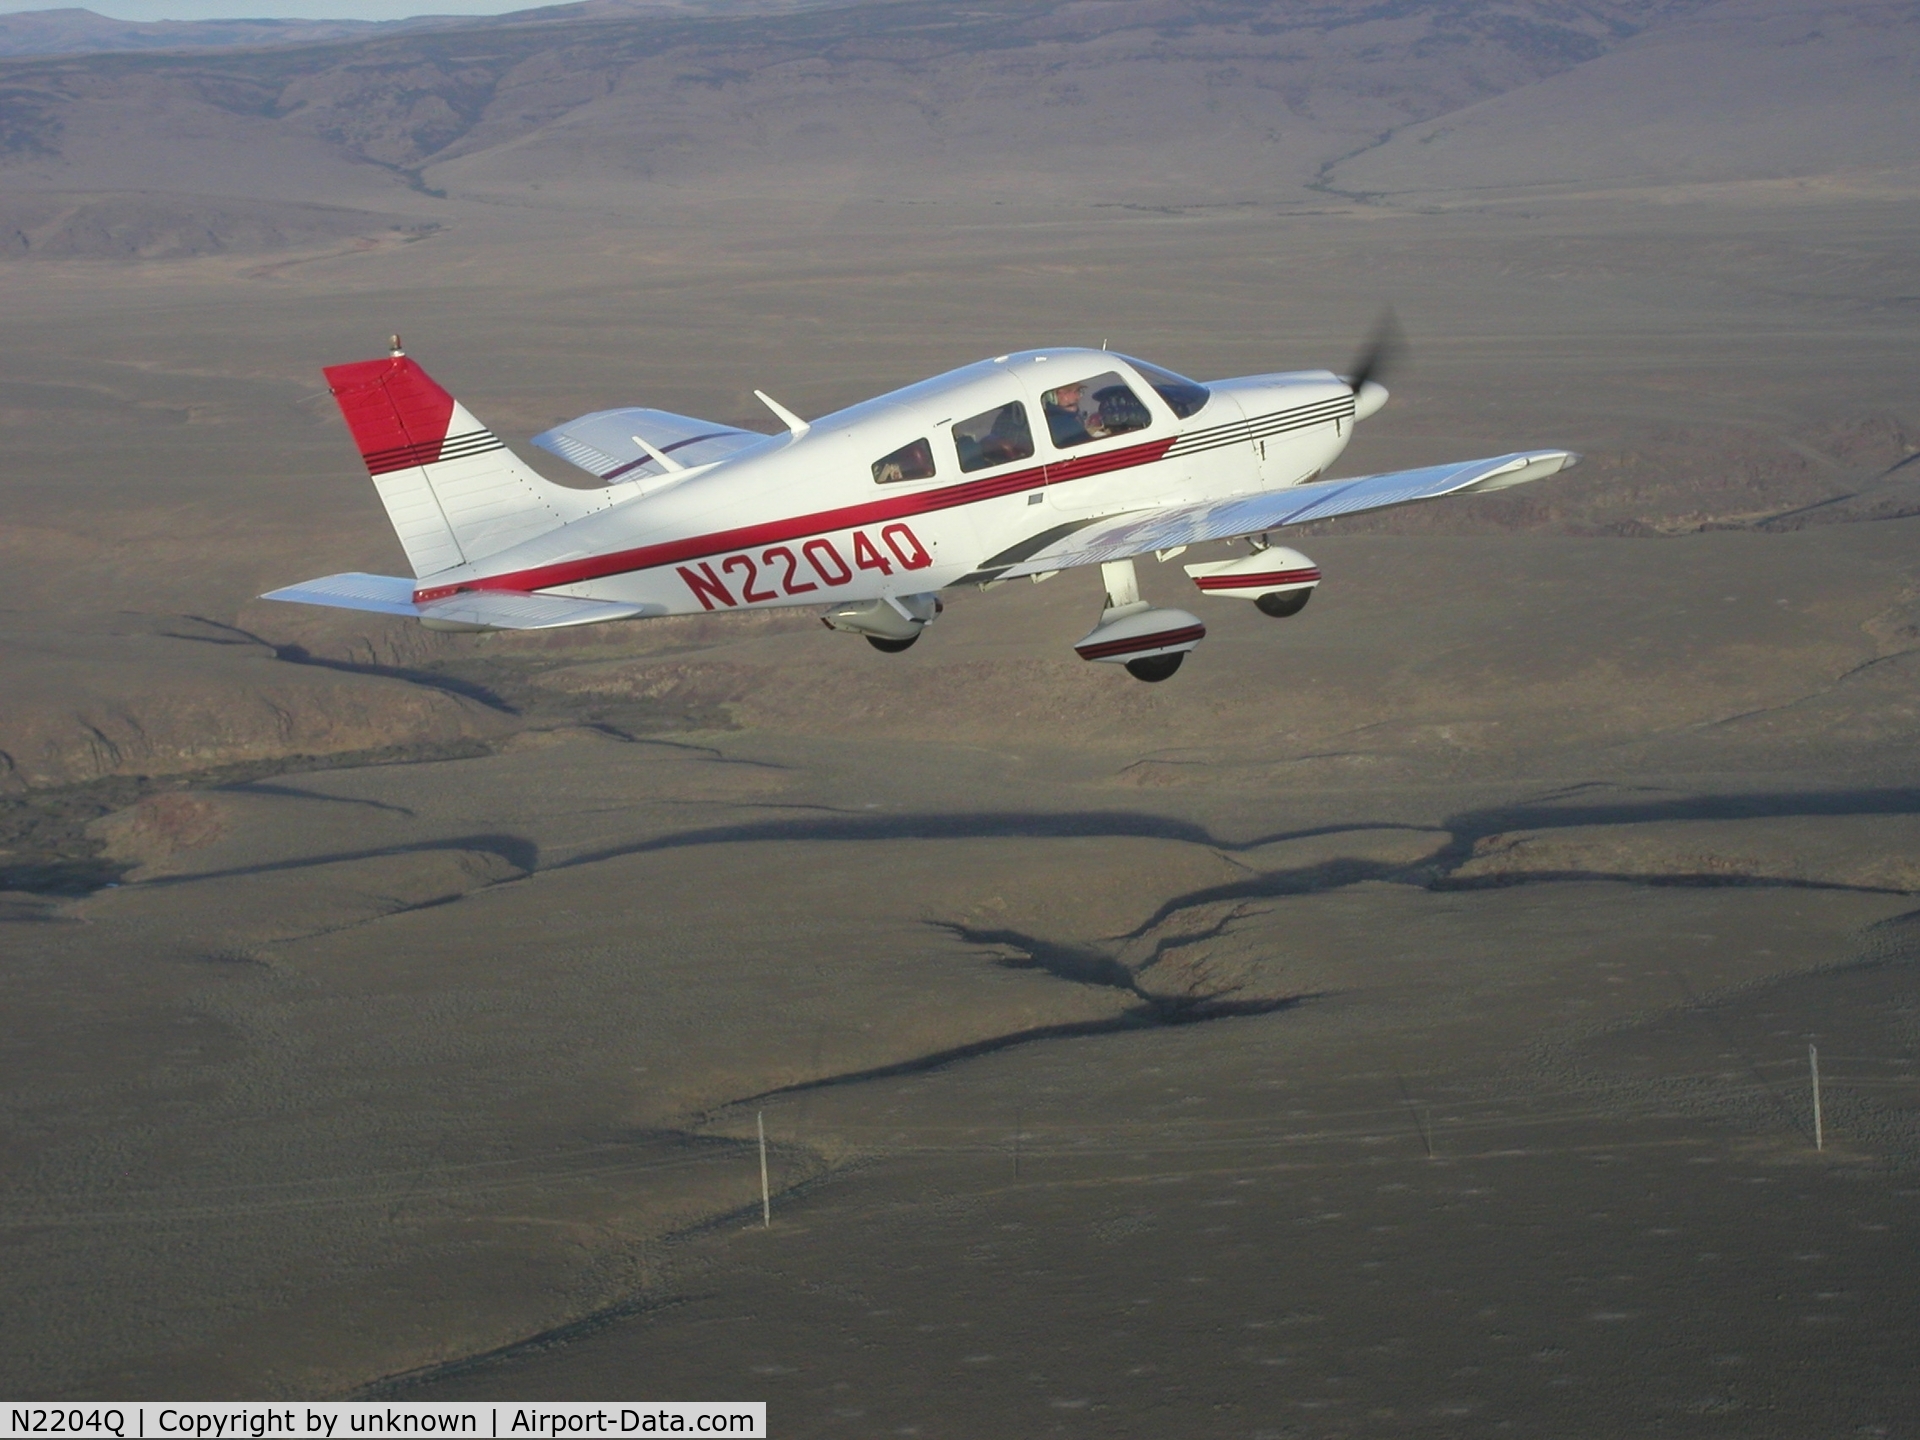 N2204Q, 1977 Piper PA-28-181 C/N 28-7790381, This picture was taken by a chase plane over the nevada desert about four years ago.